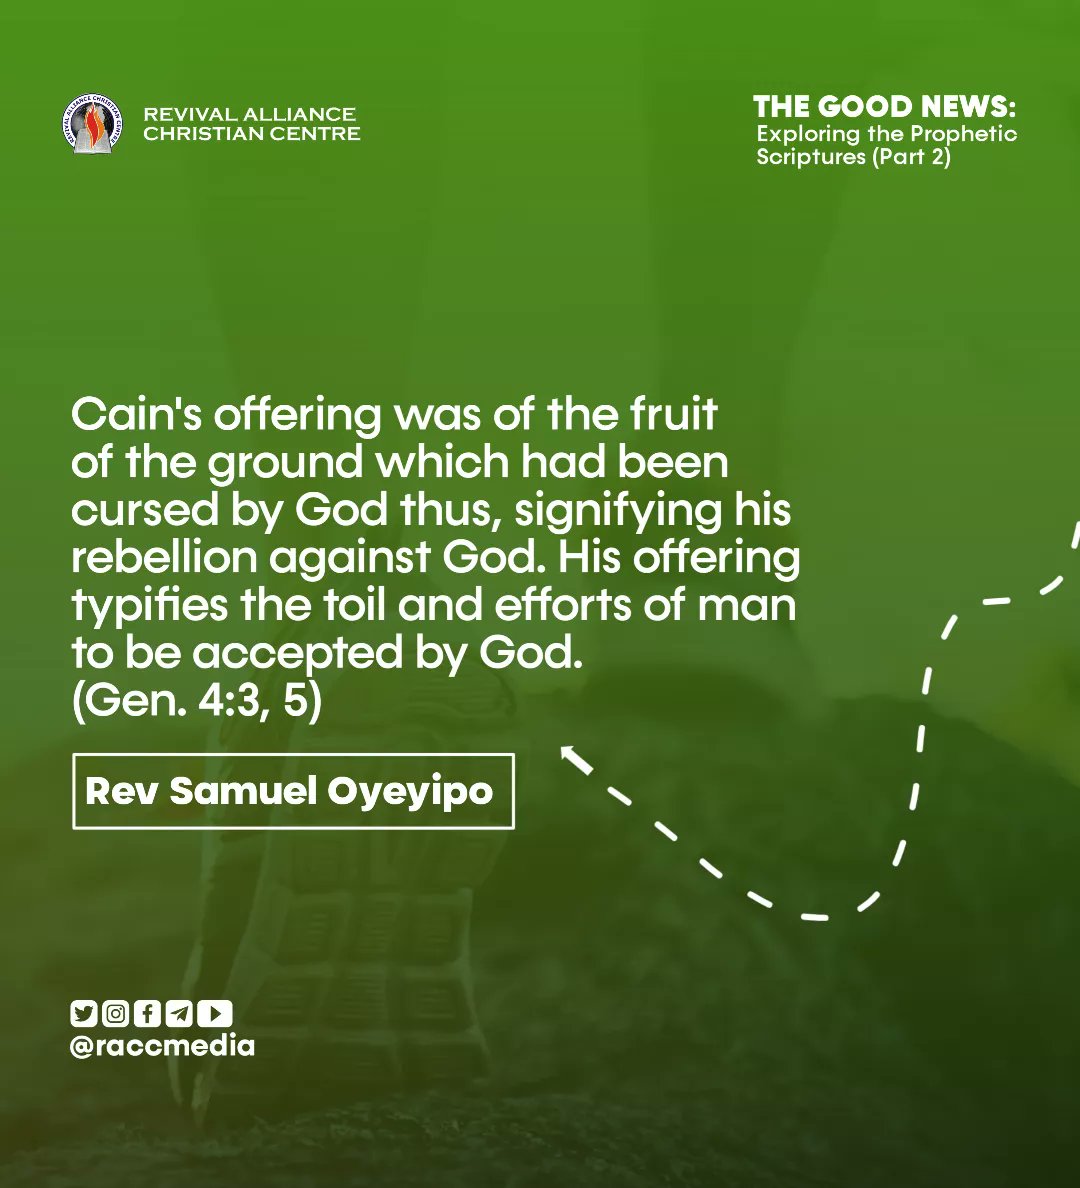 TheGOOD NEWS:  Trananteongk Juro UPo Prept Cain's offering was of the fruit of the ground which had been cursed by God thus, signifying his rebellion against God: His offering typifies the toil and efforts of man to be accepted by God: (Gen 4.3,5) Rev Samuel Oyeyipo Dodd Onoccmedia